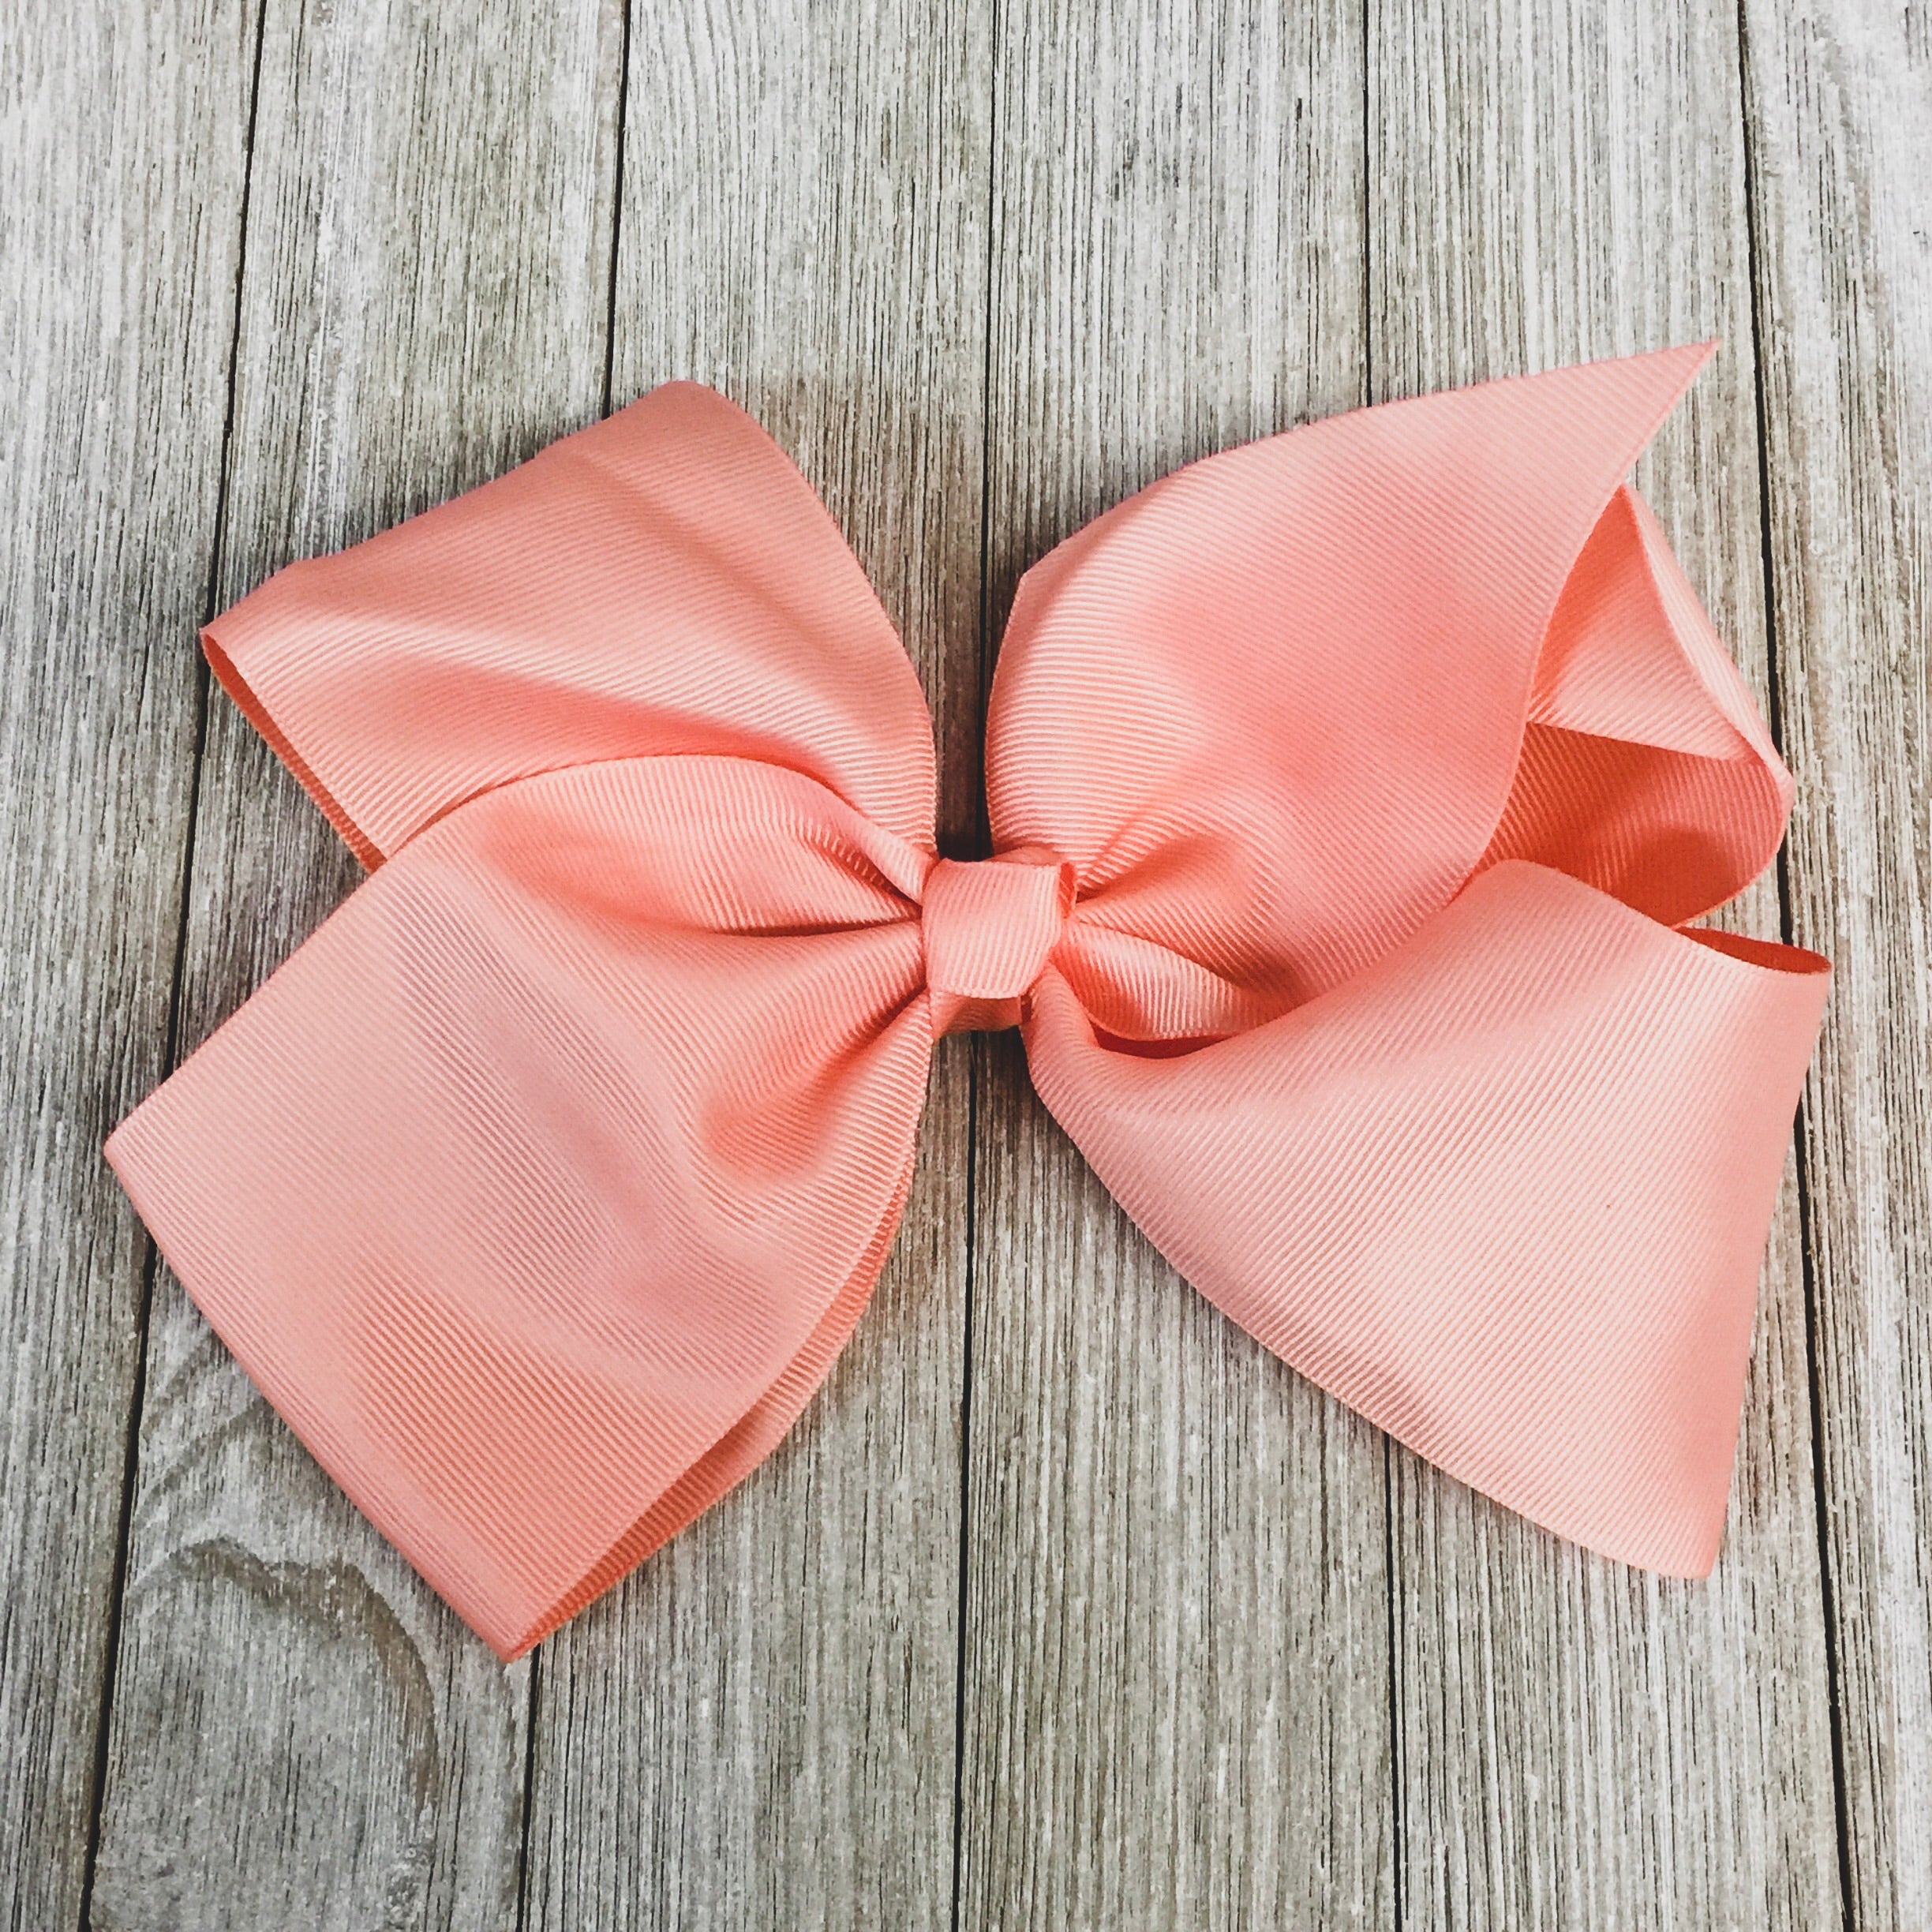 Solid Color Hair Bow in Peach - Giddy Up Glamour Boutique